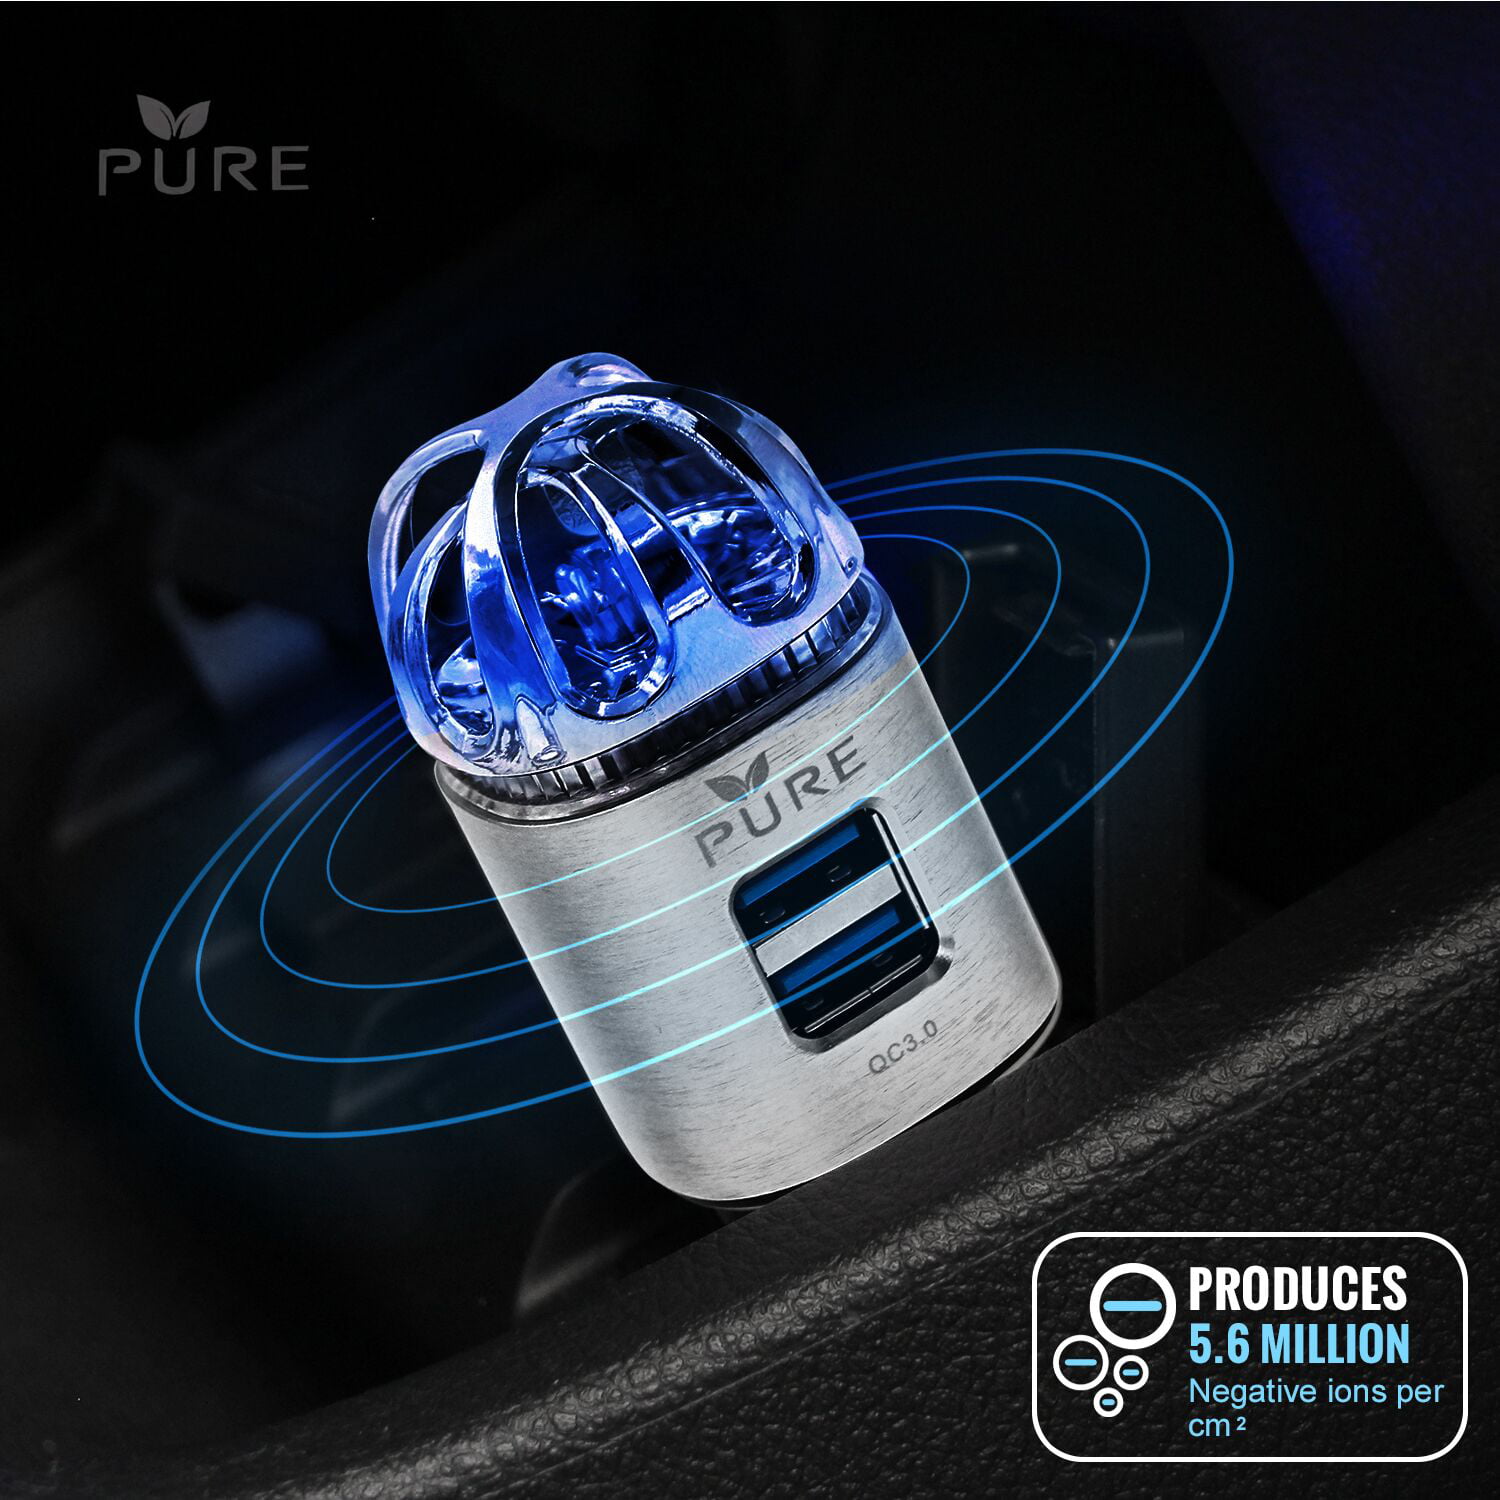 Handheld Car Air Purifier with USB Charger, Air Freshener